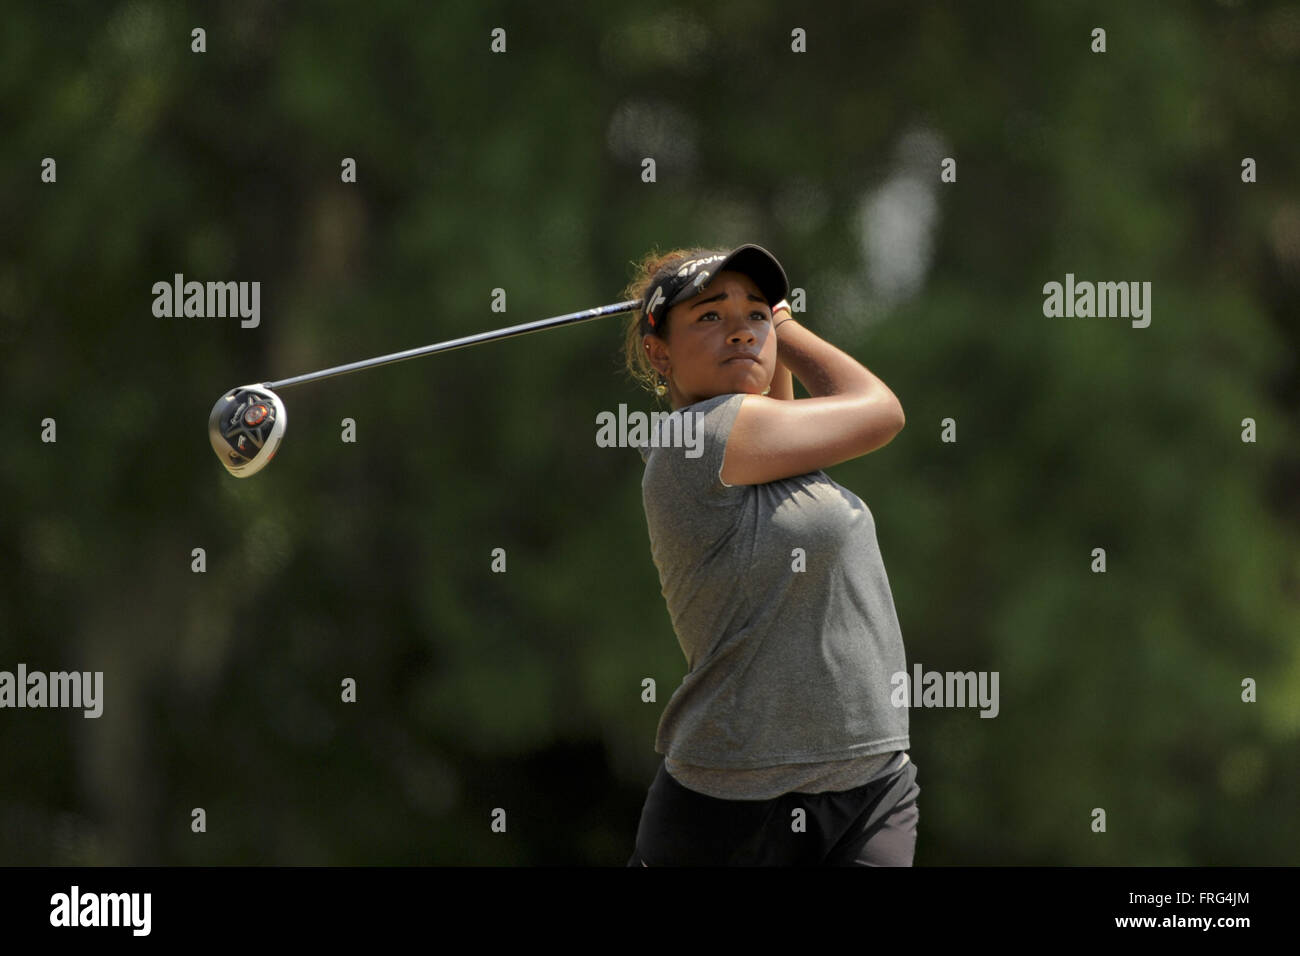 Lake Wales, FL, USA. 22nd Mar, 2014. Ginger Howard during the second round of the Florida's Natural Charity Classic at Lake Wales Country Club on March 22, 2014 in Lake Wales, FL.ZUMA PRESS/Scott A. Miller © Scott A. Miller/ZUMA Wire/Alamy Live News Stock Photo